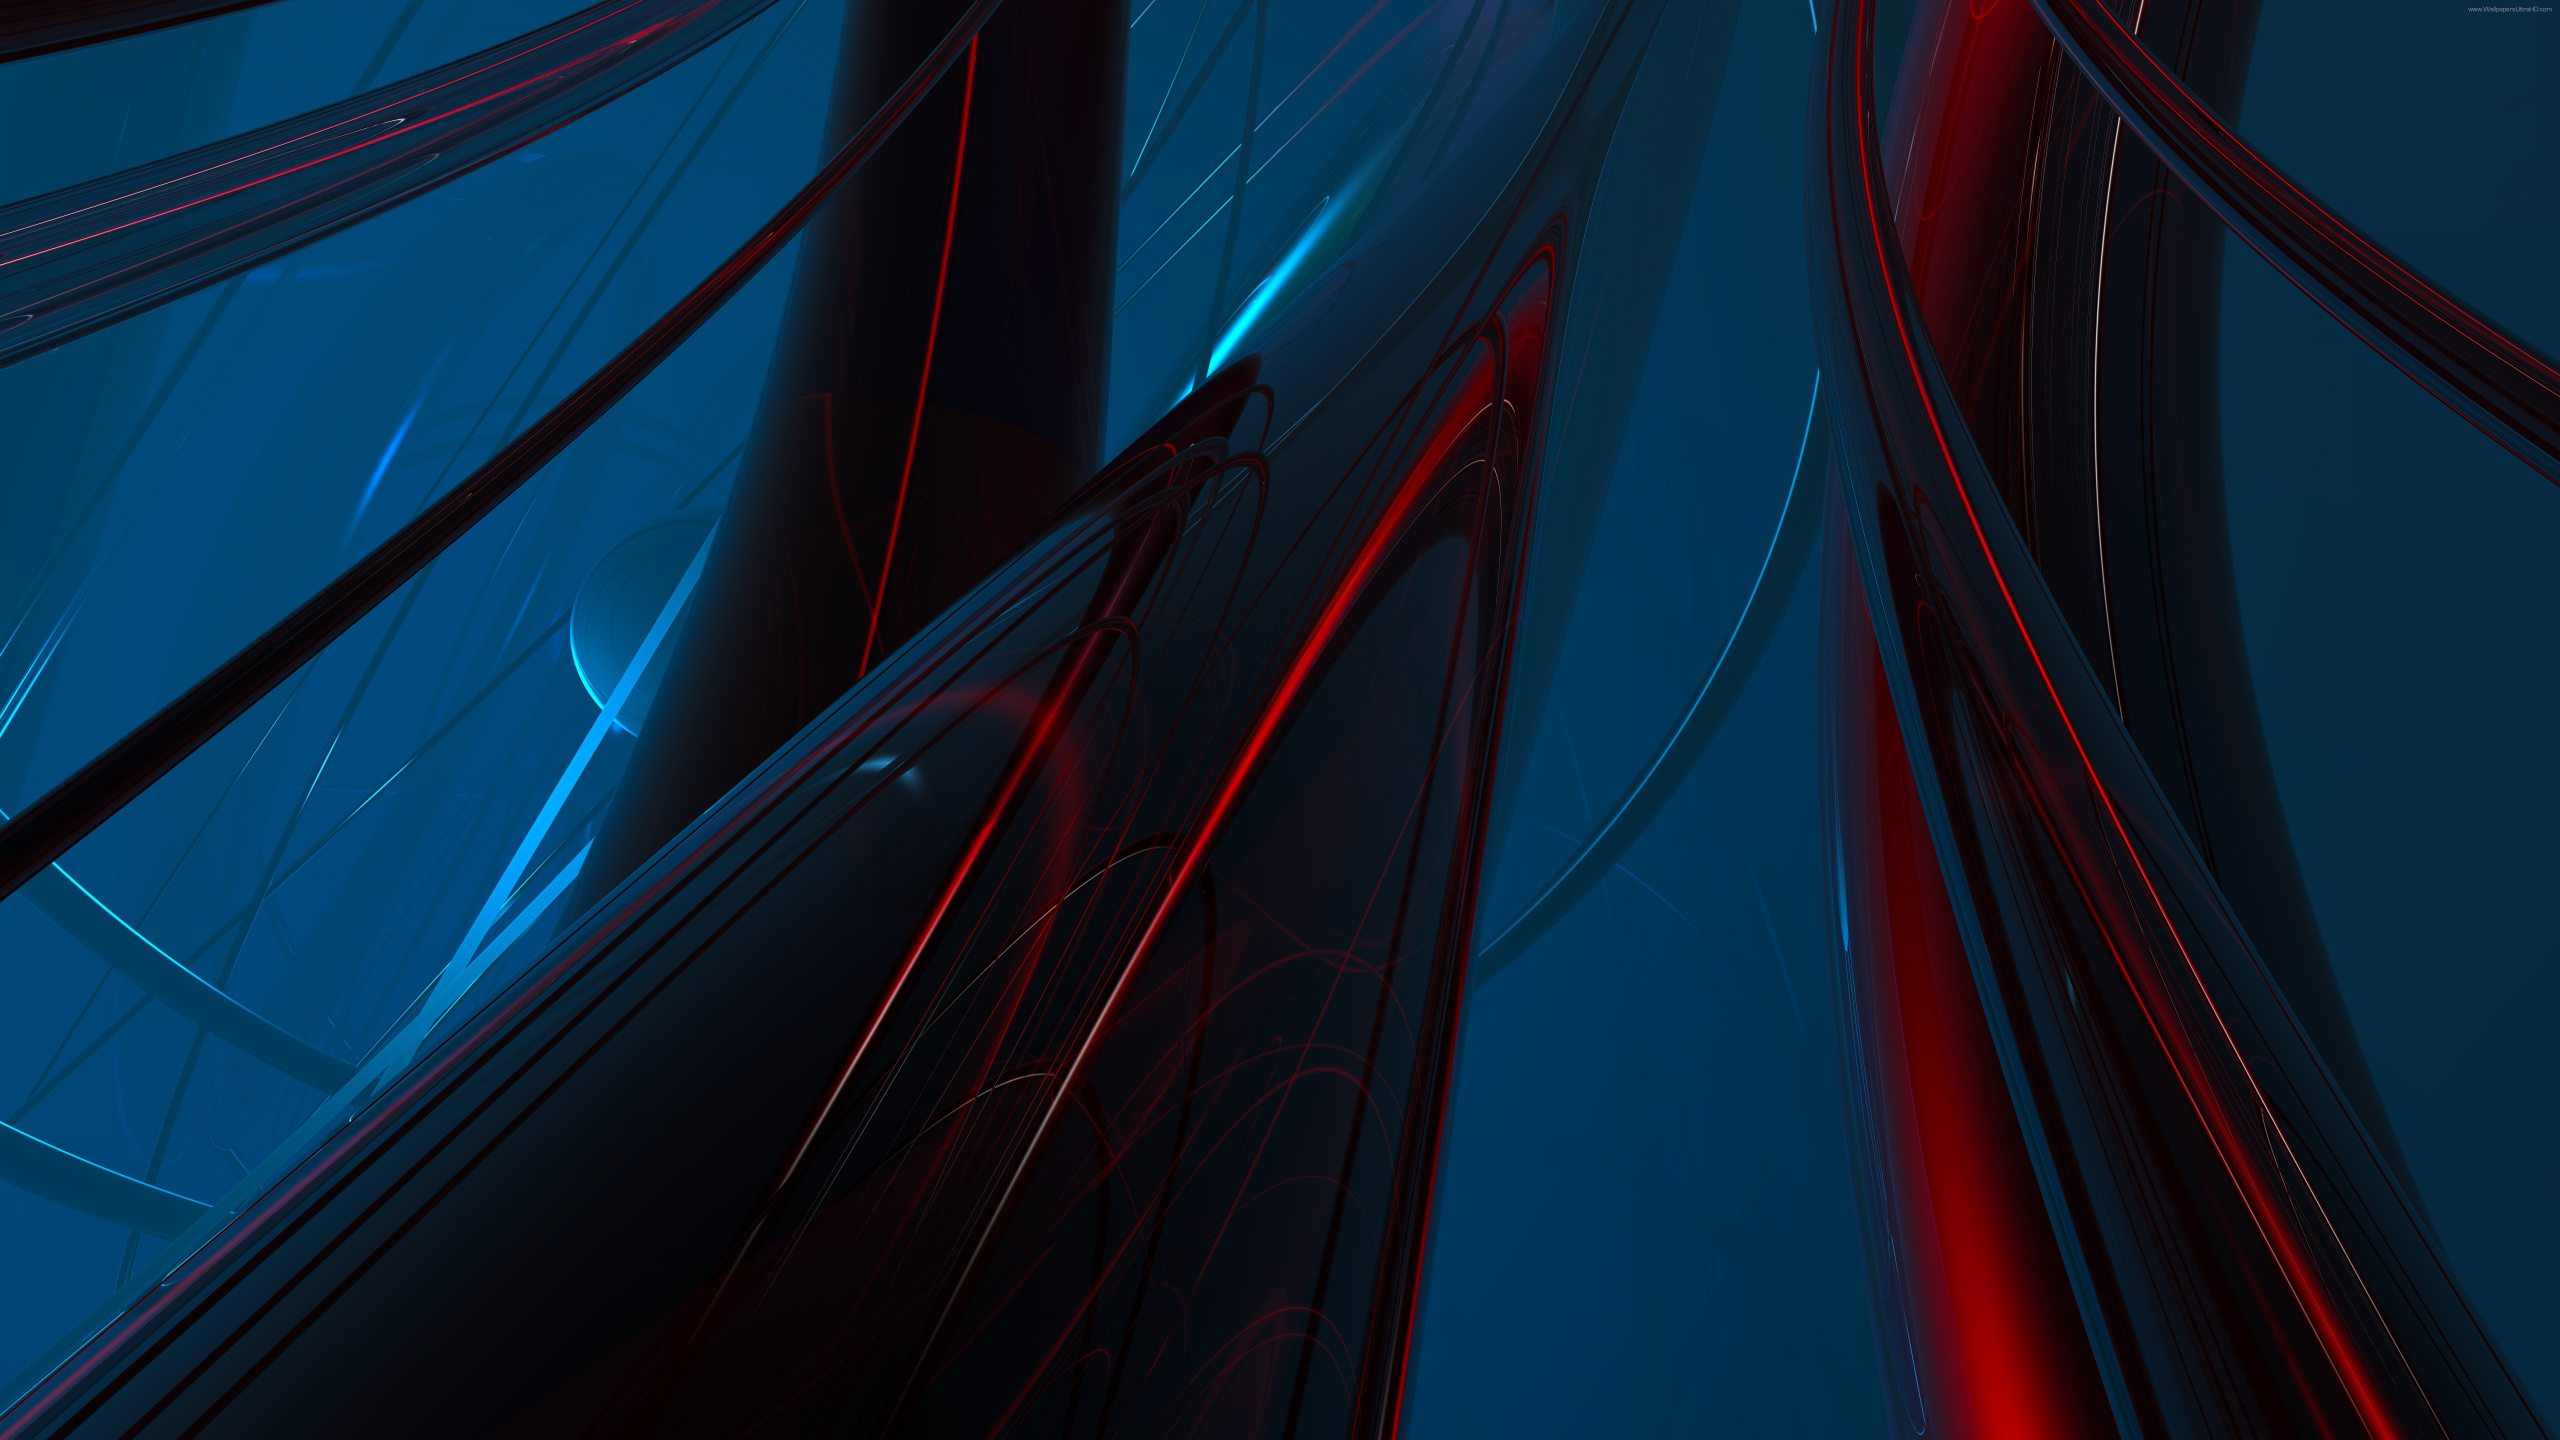 Blue and Red Light Streaks. Wallpaper in 2560x1440 Resolution